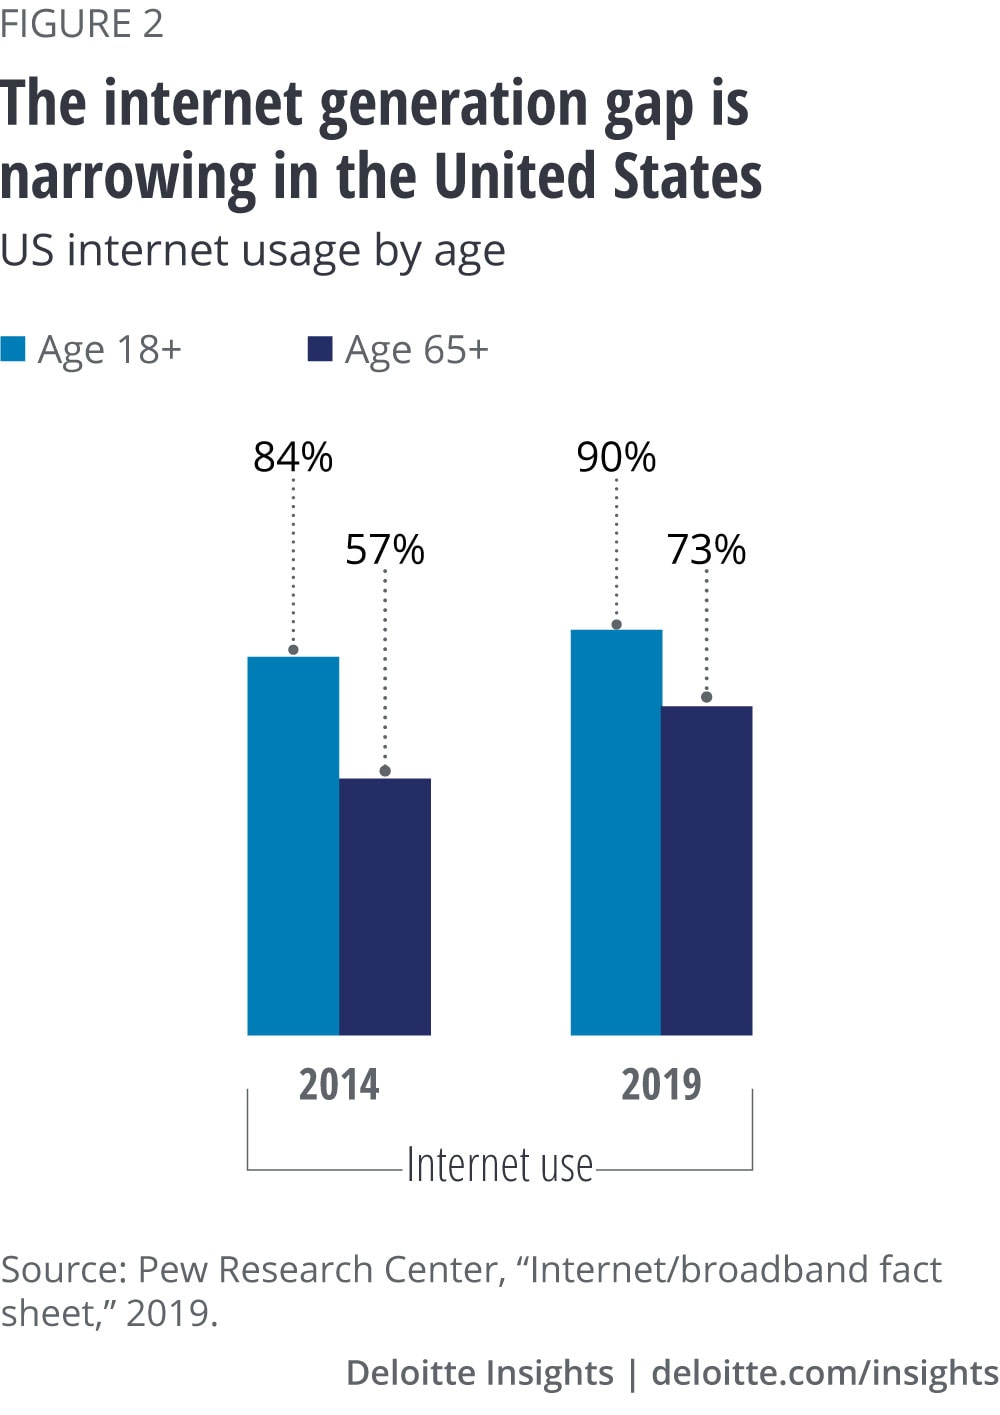 The internet generation gap is narrowing in the United States